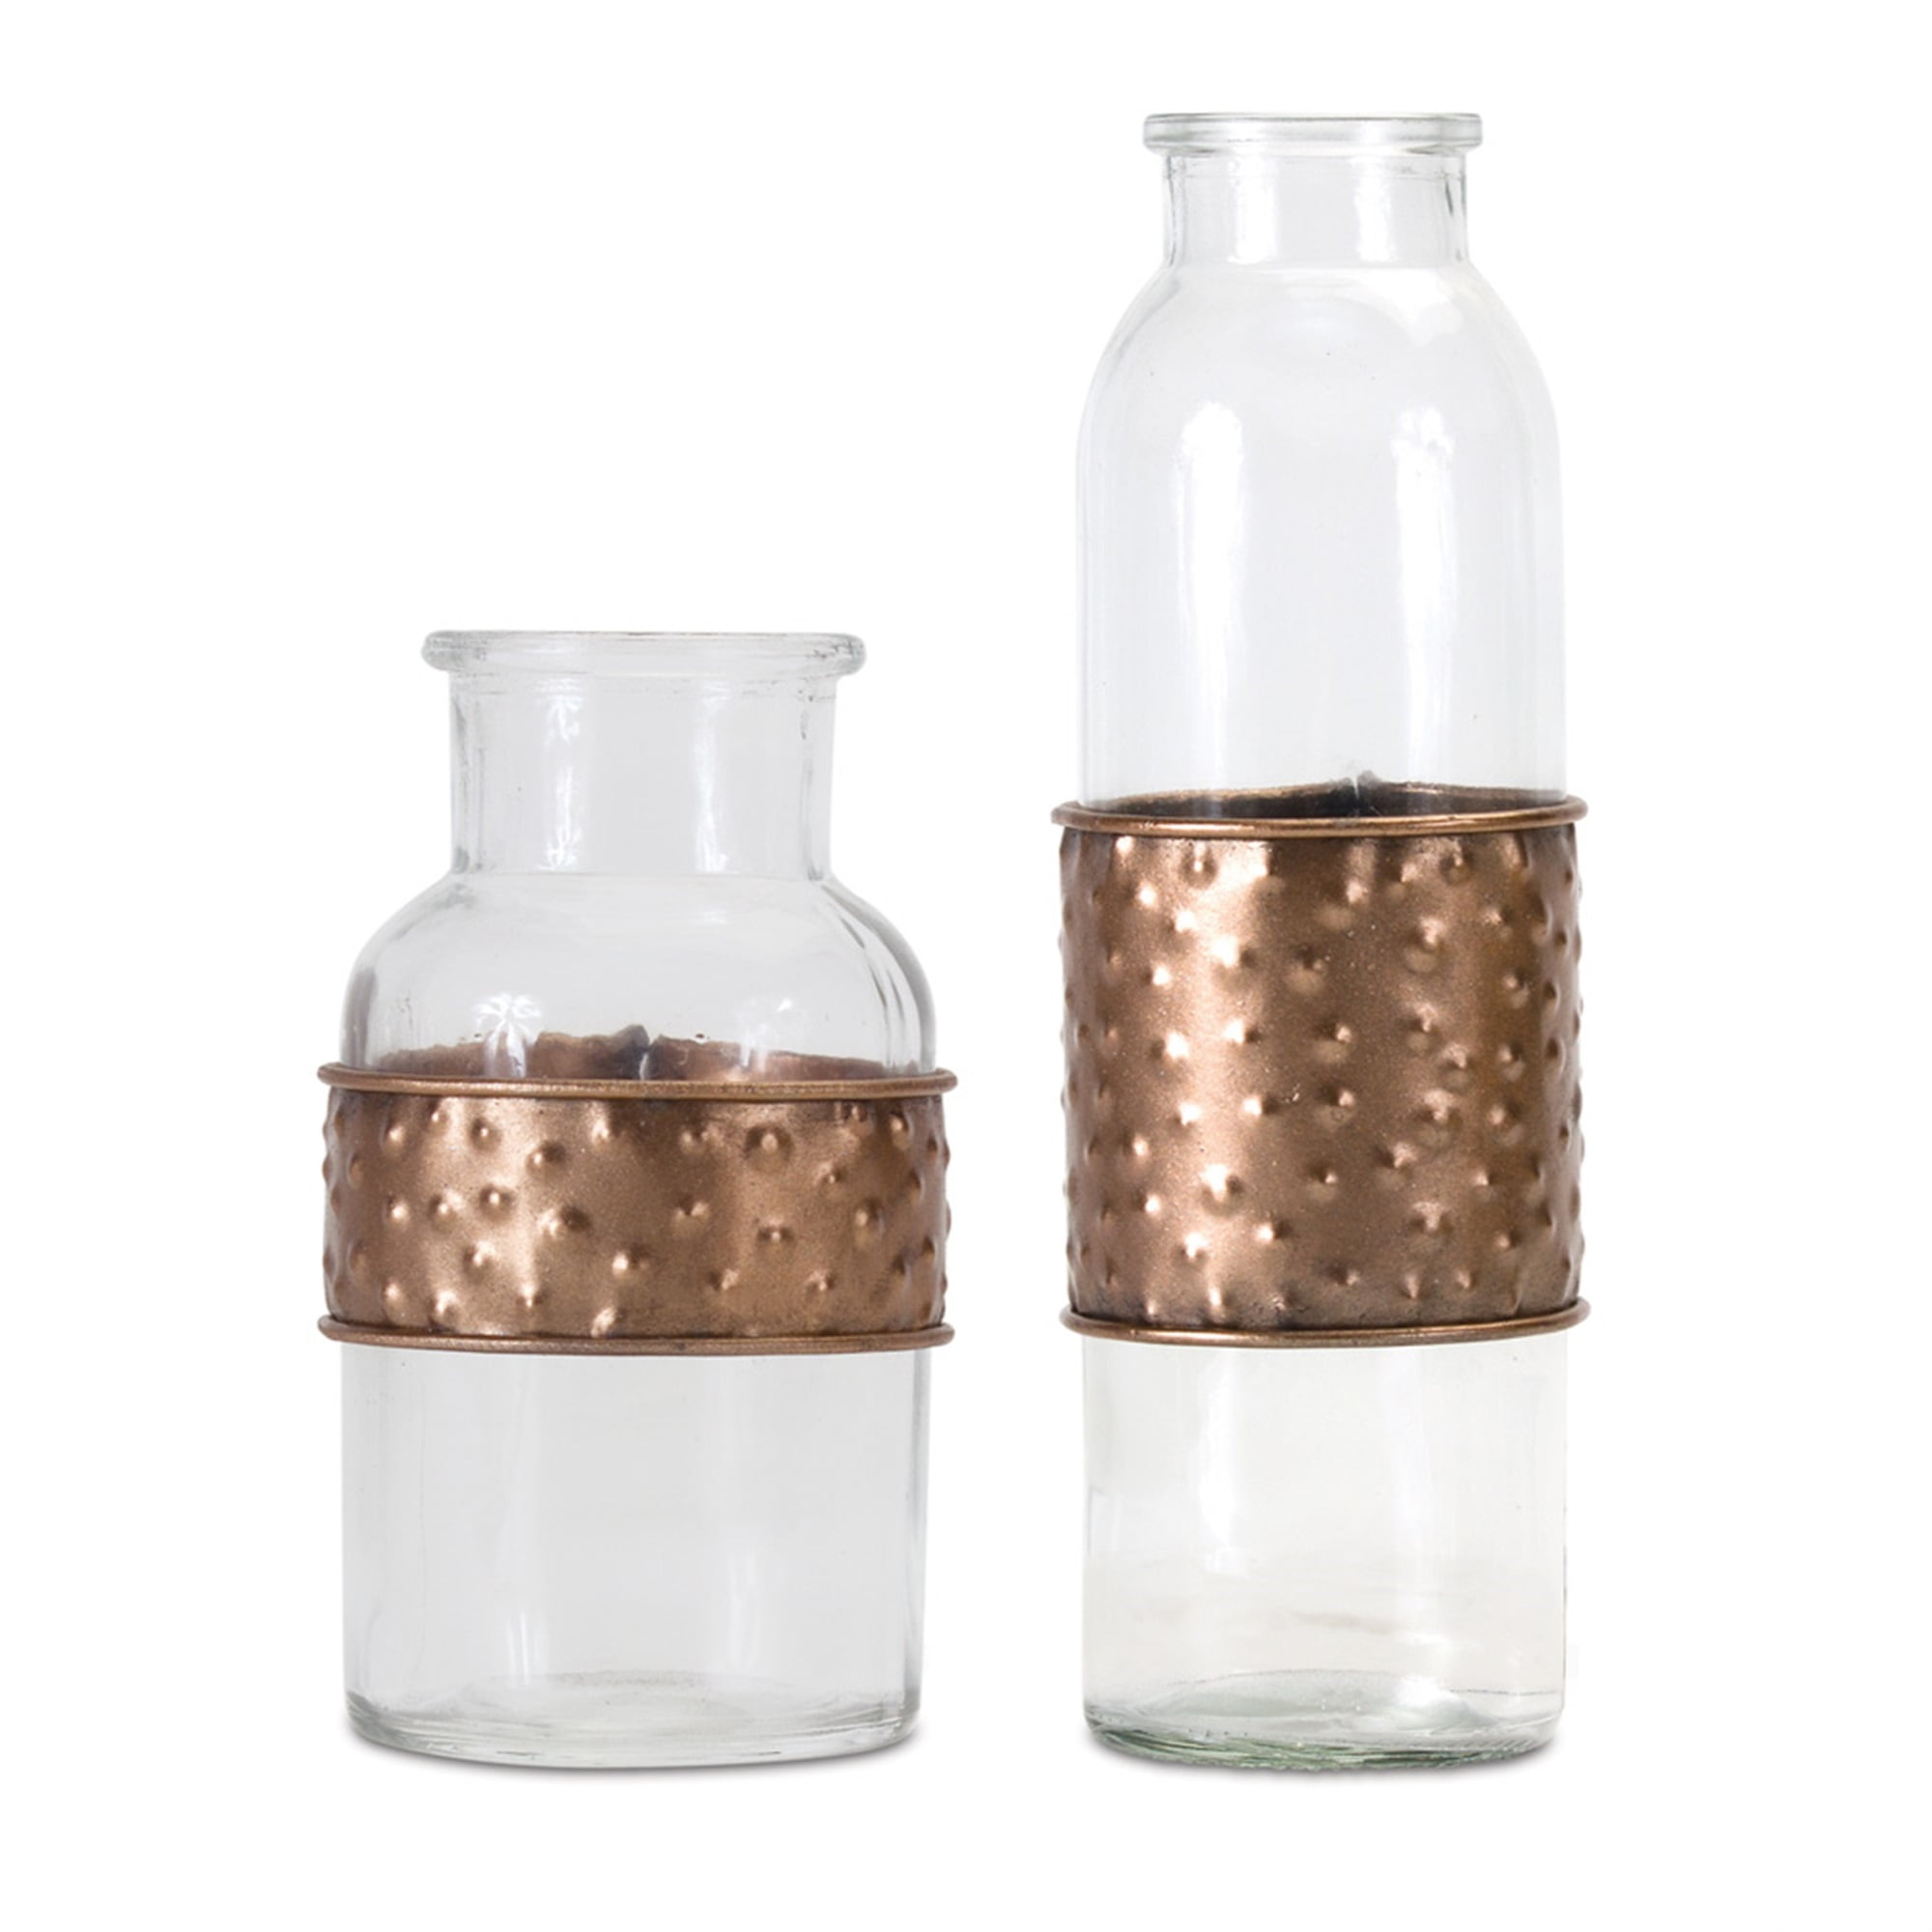 Bottle With Metal Wrap (Set of 4) 3.5" x 5"H, 3" x 7.5"H Glass/Iron